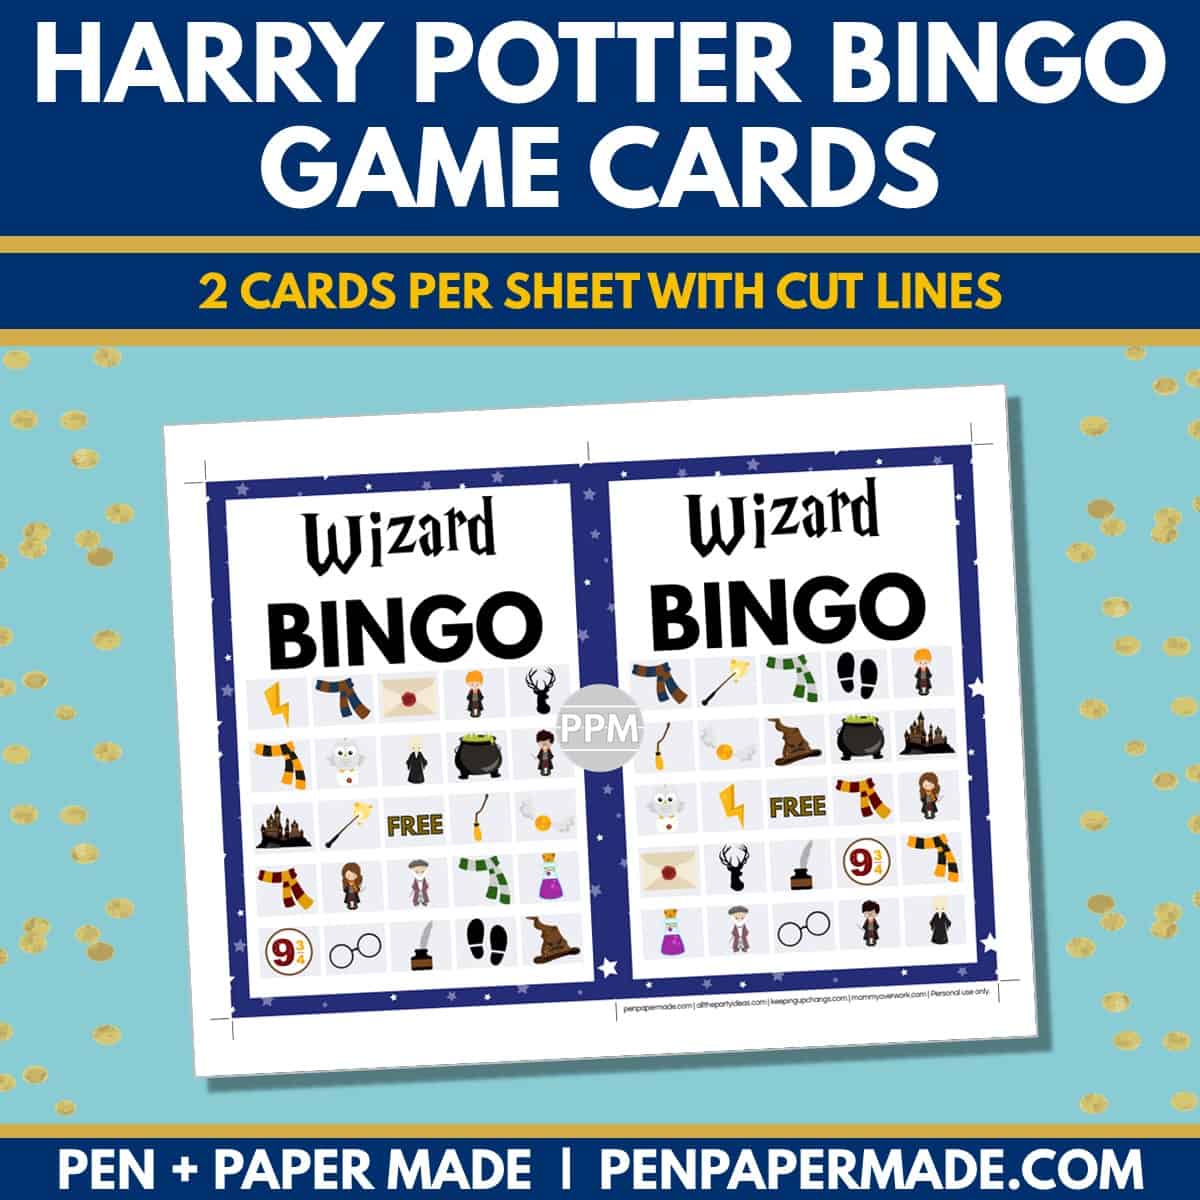 wizard and harry potter bingo card 5x5 5x7 game boards with images and text words.